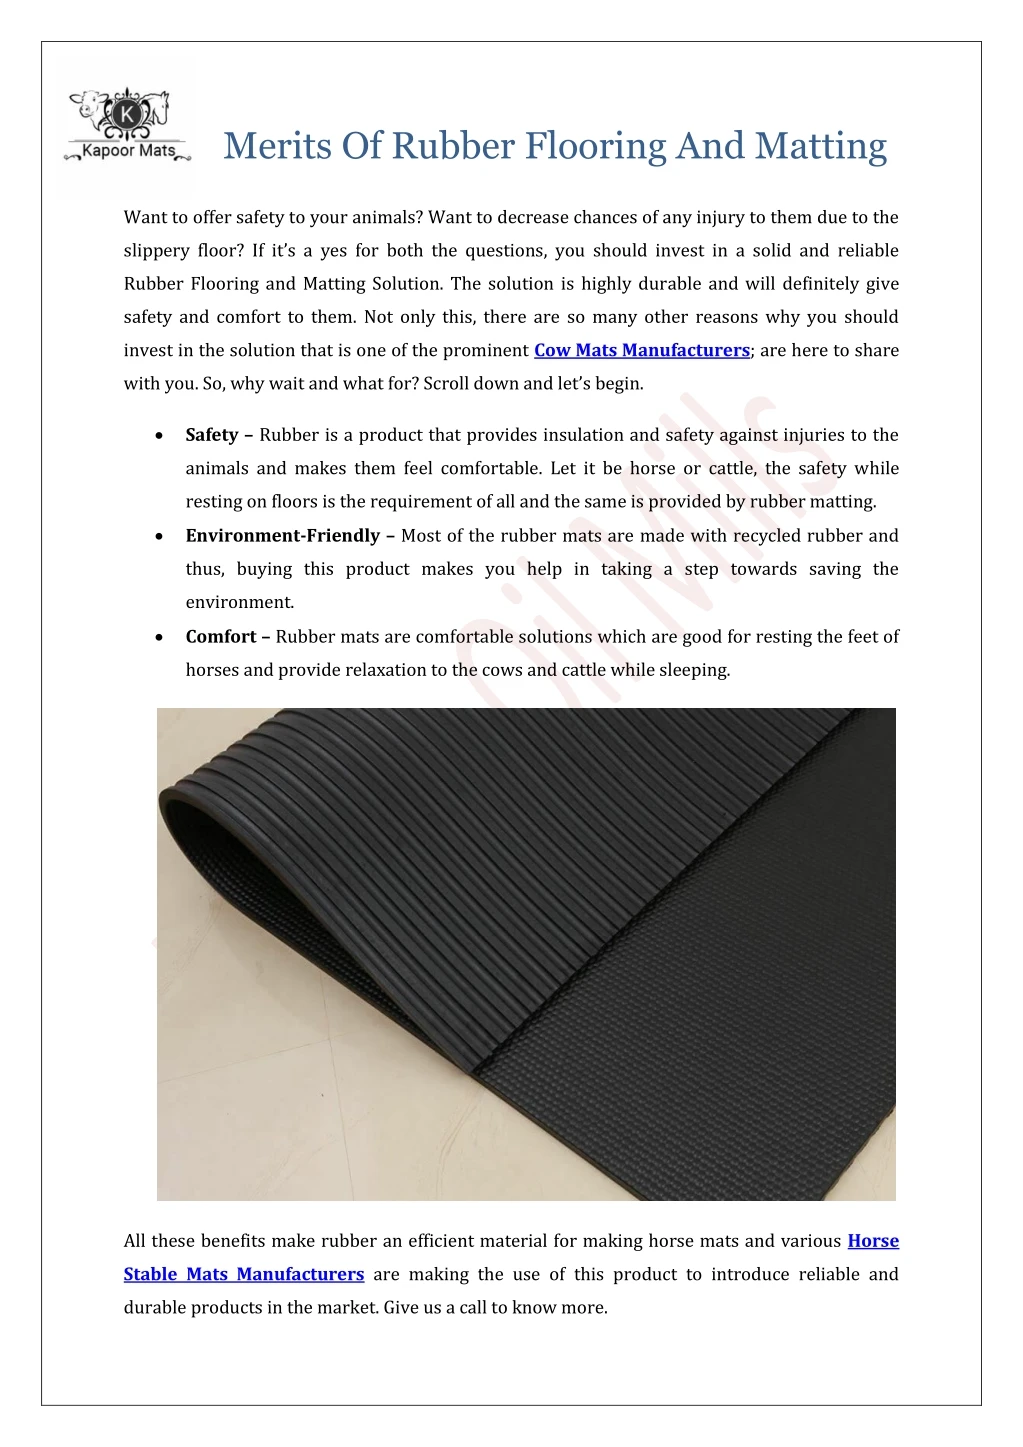 merits of rubber flooring and matting